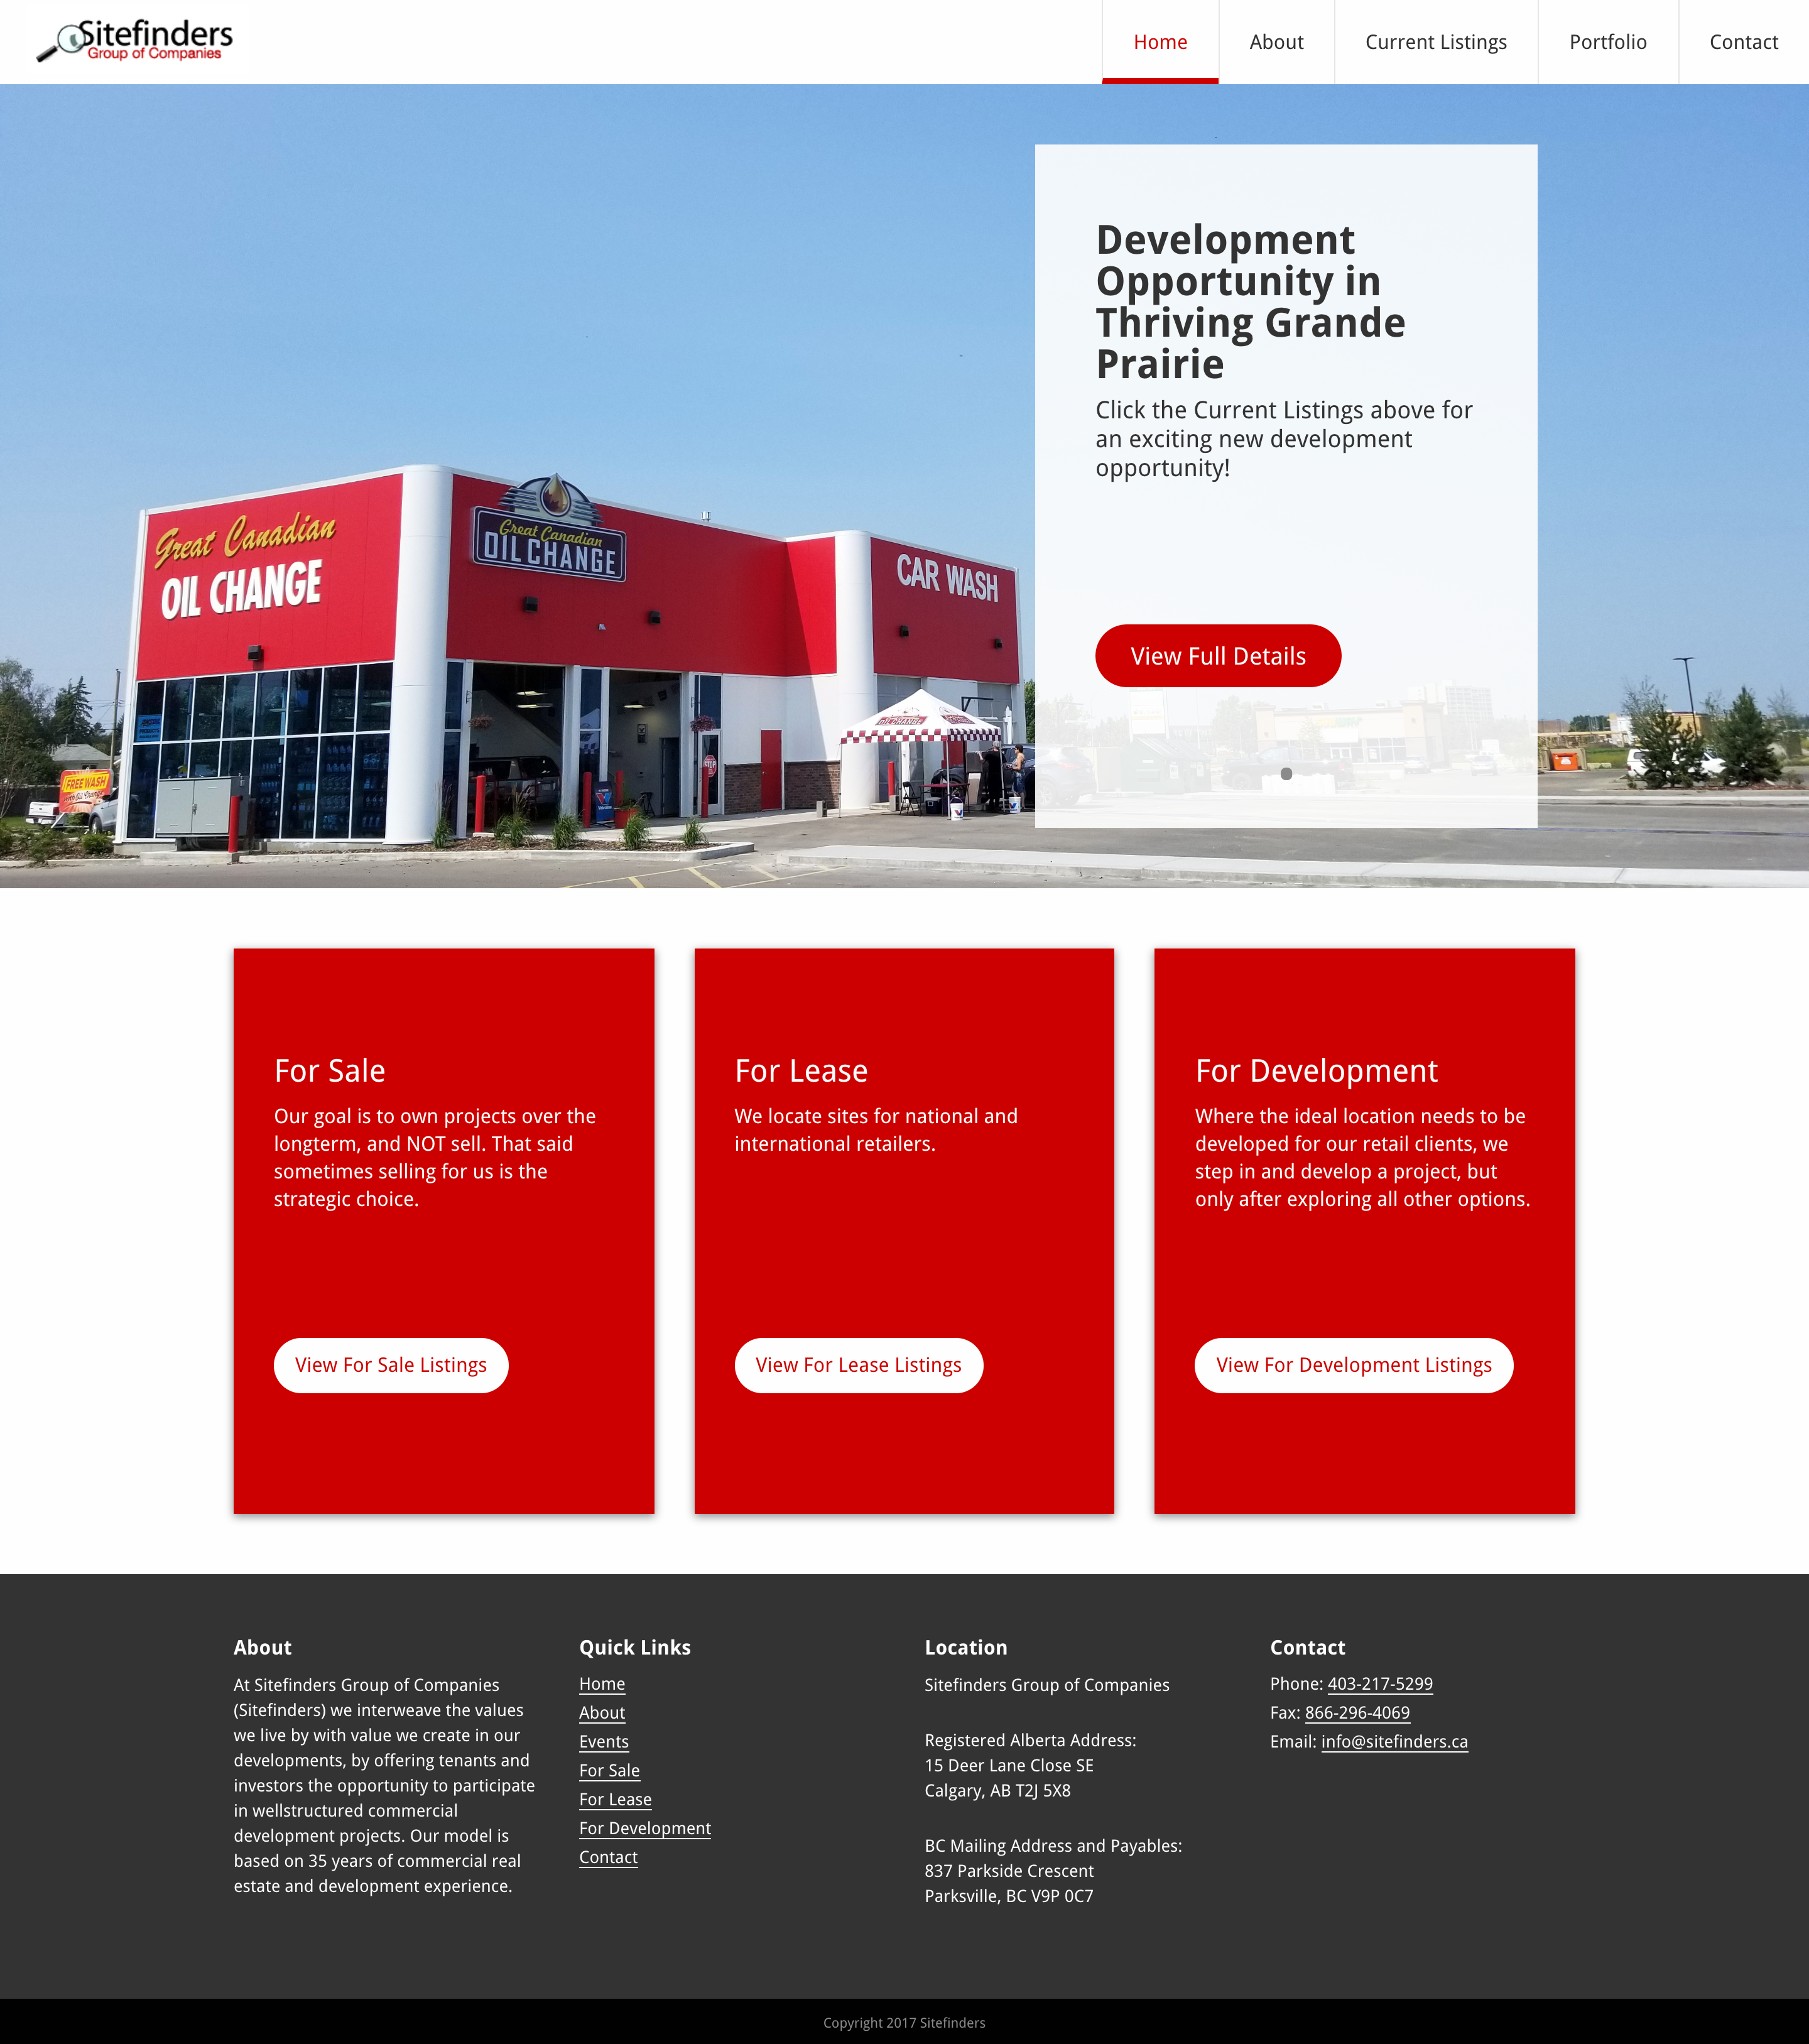 Sitefinders' newly designed homepage.